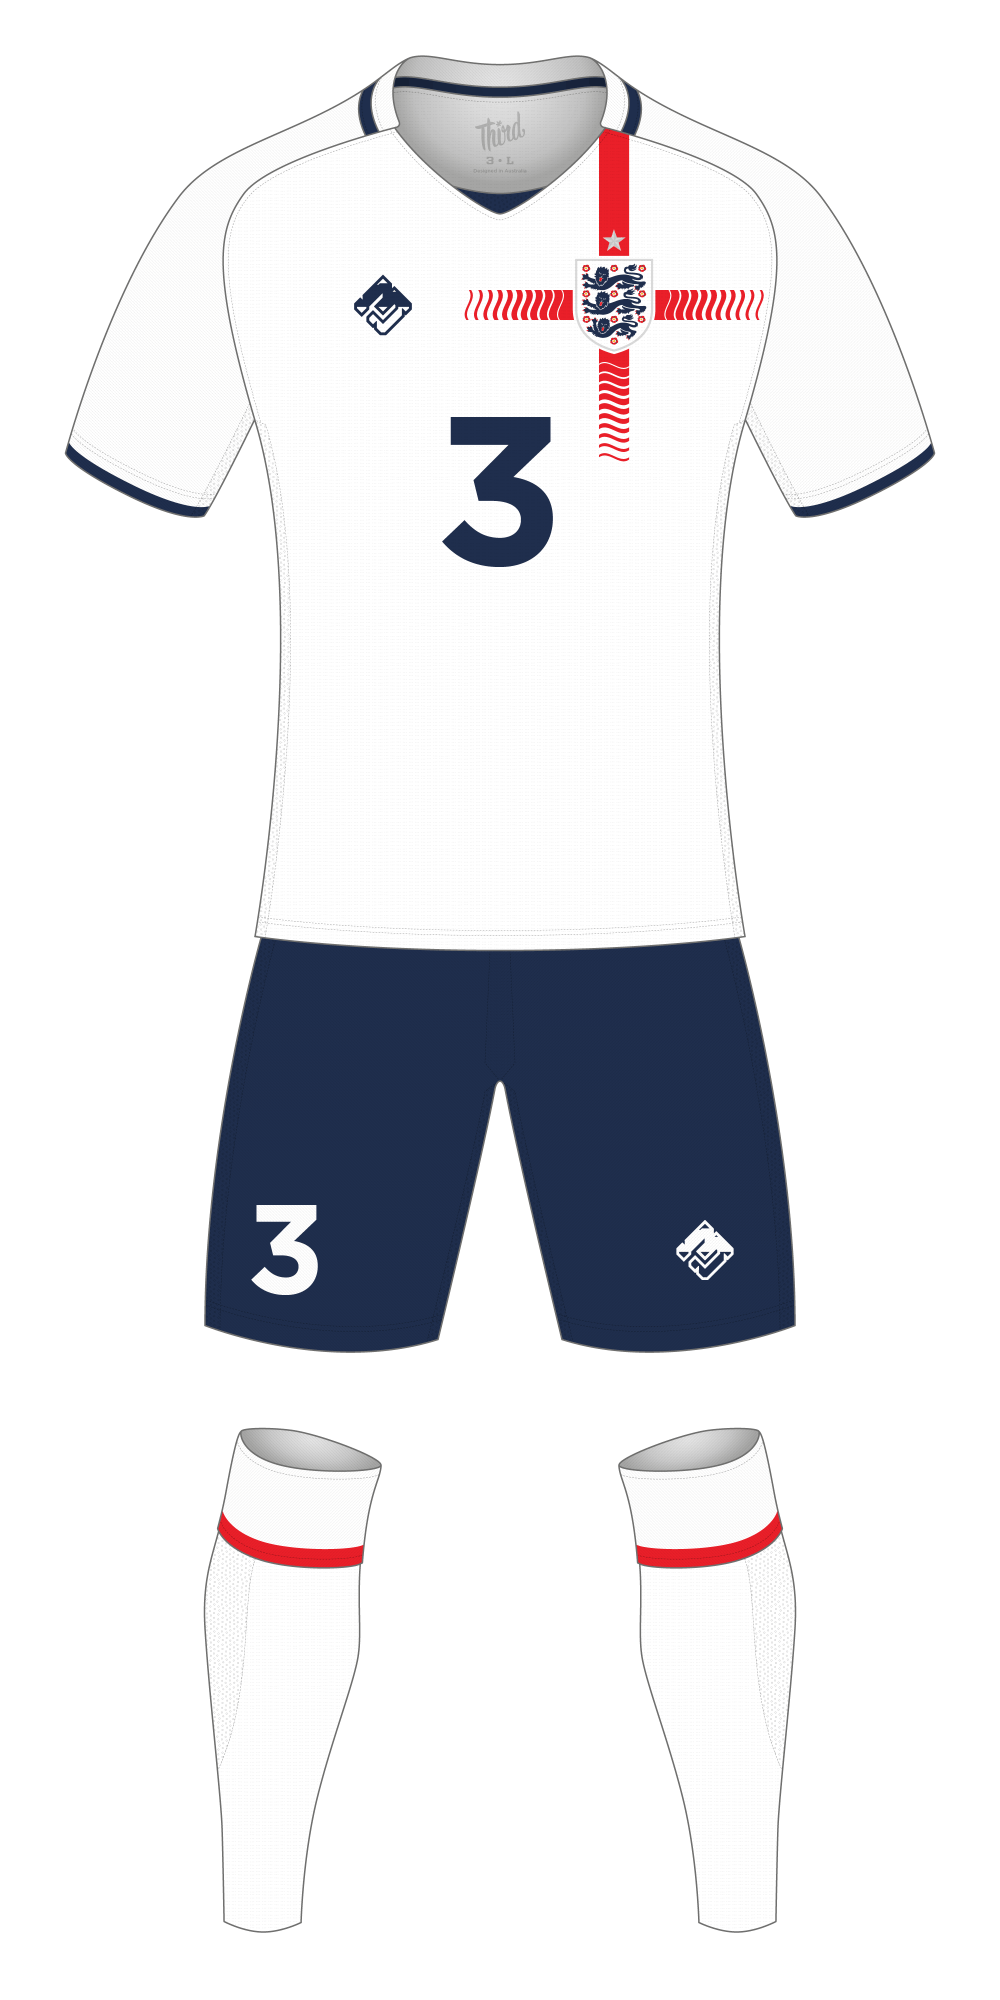 England World Cup 2018 concept